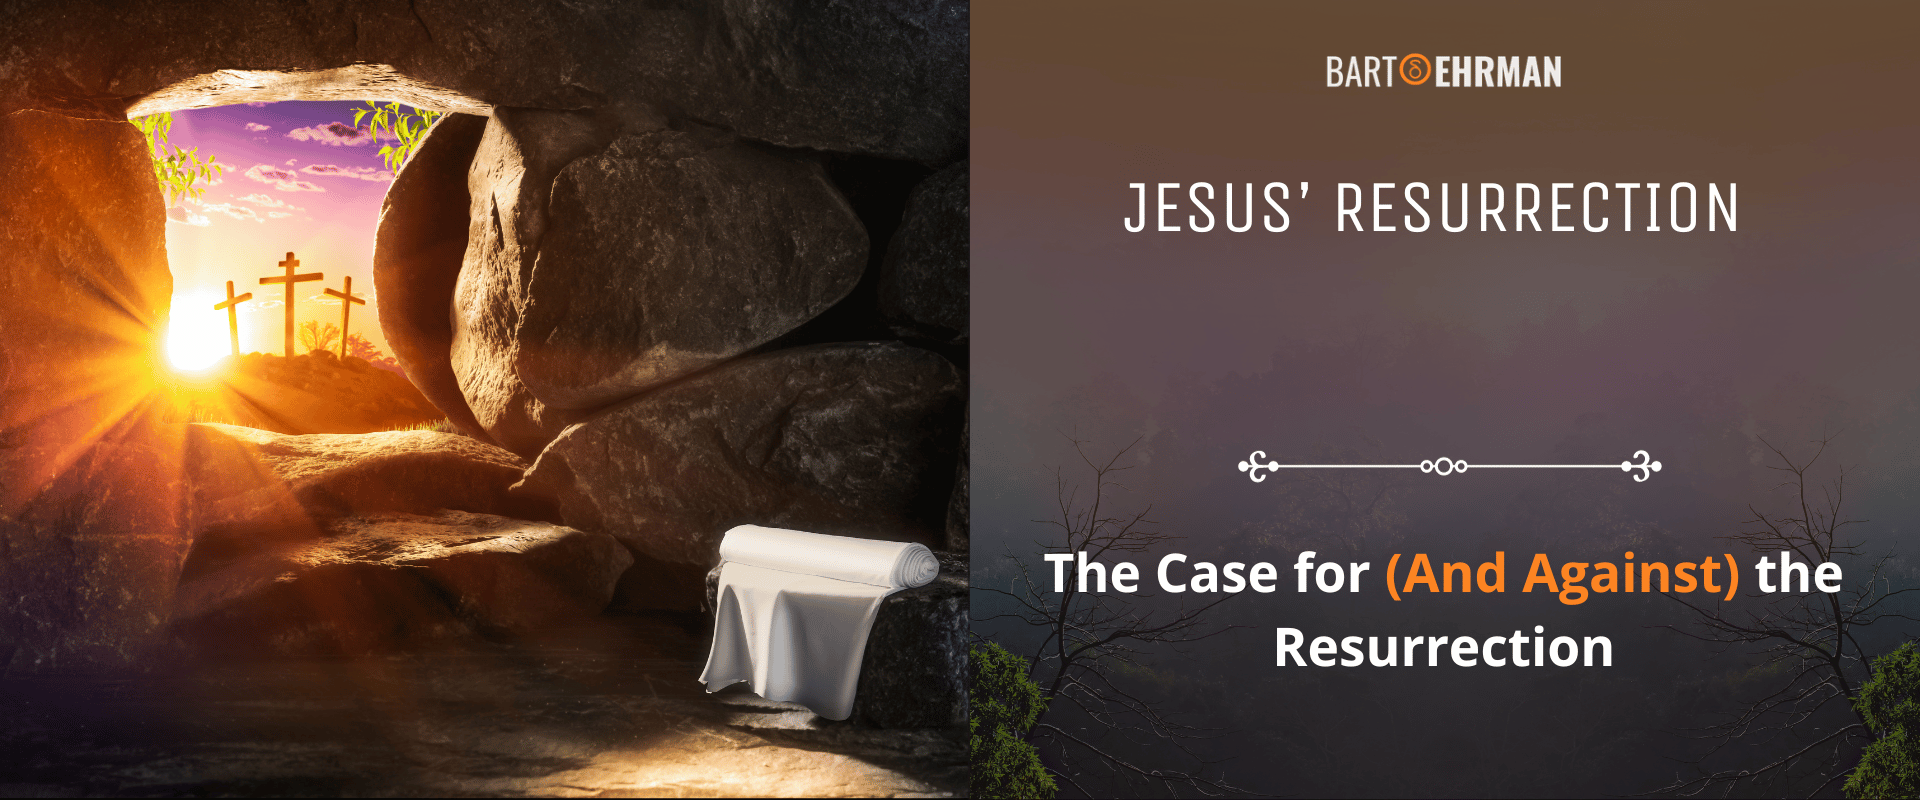 The Case for (And Against) Jesus' Resurrection